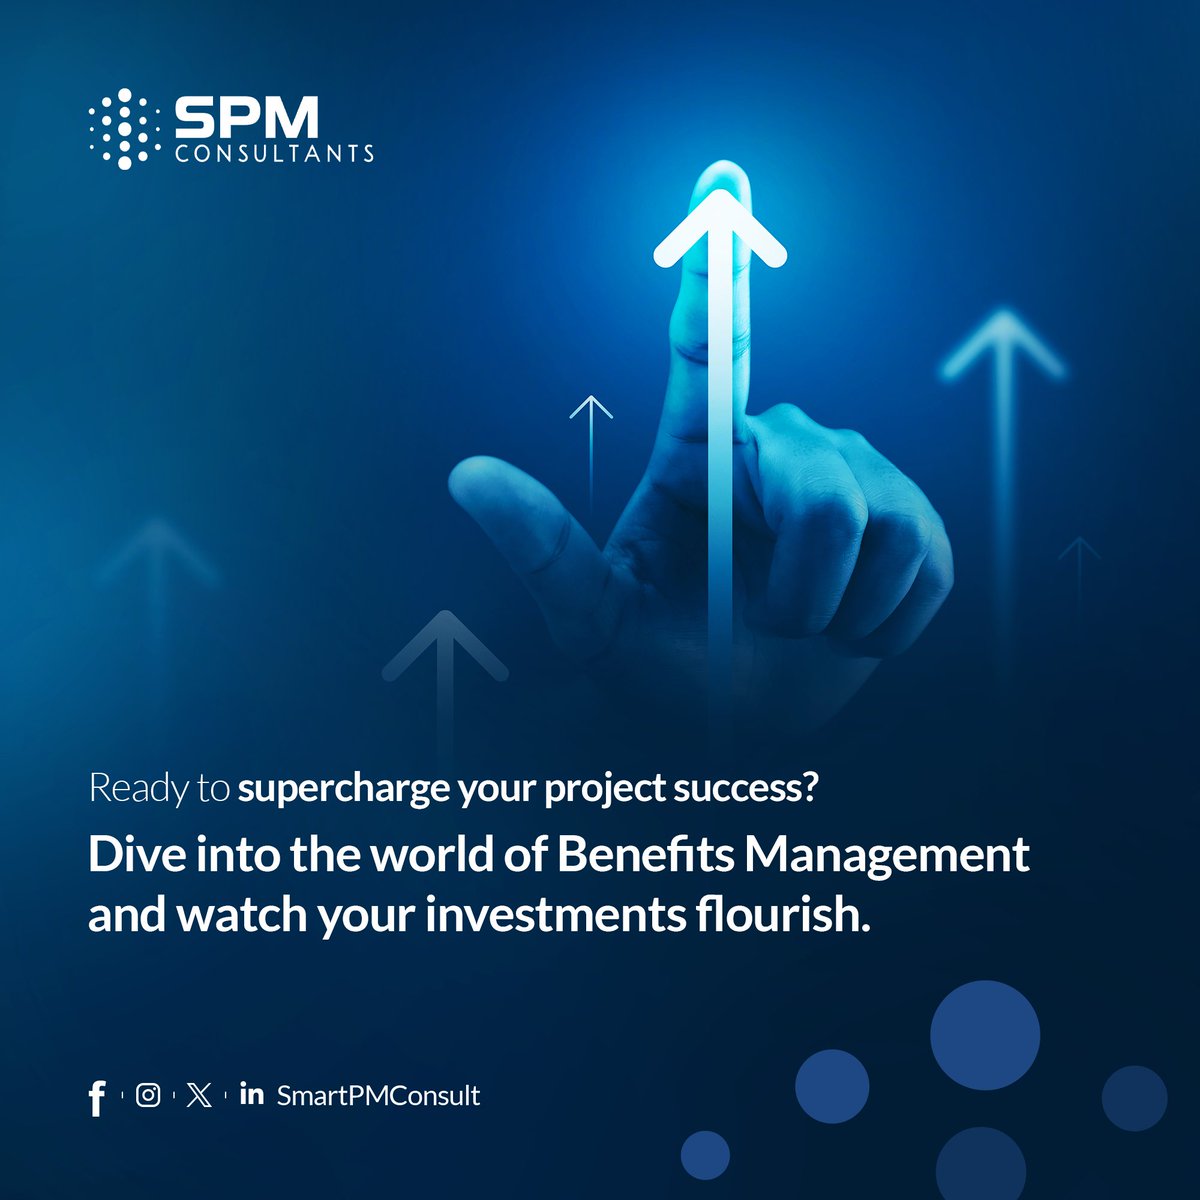 ✅ ROI Maximization: Extract the full potential of your investments with clear benefit realization.
✅ Continuous Improvement: Learn and grow from each project, fostering a culture of excellence.

#managementservices #managementconsulting #management #benefitsmanagement